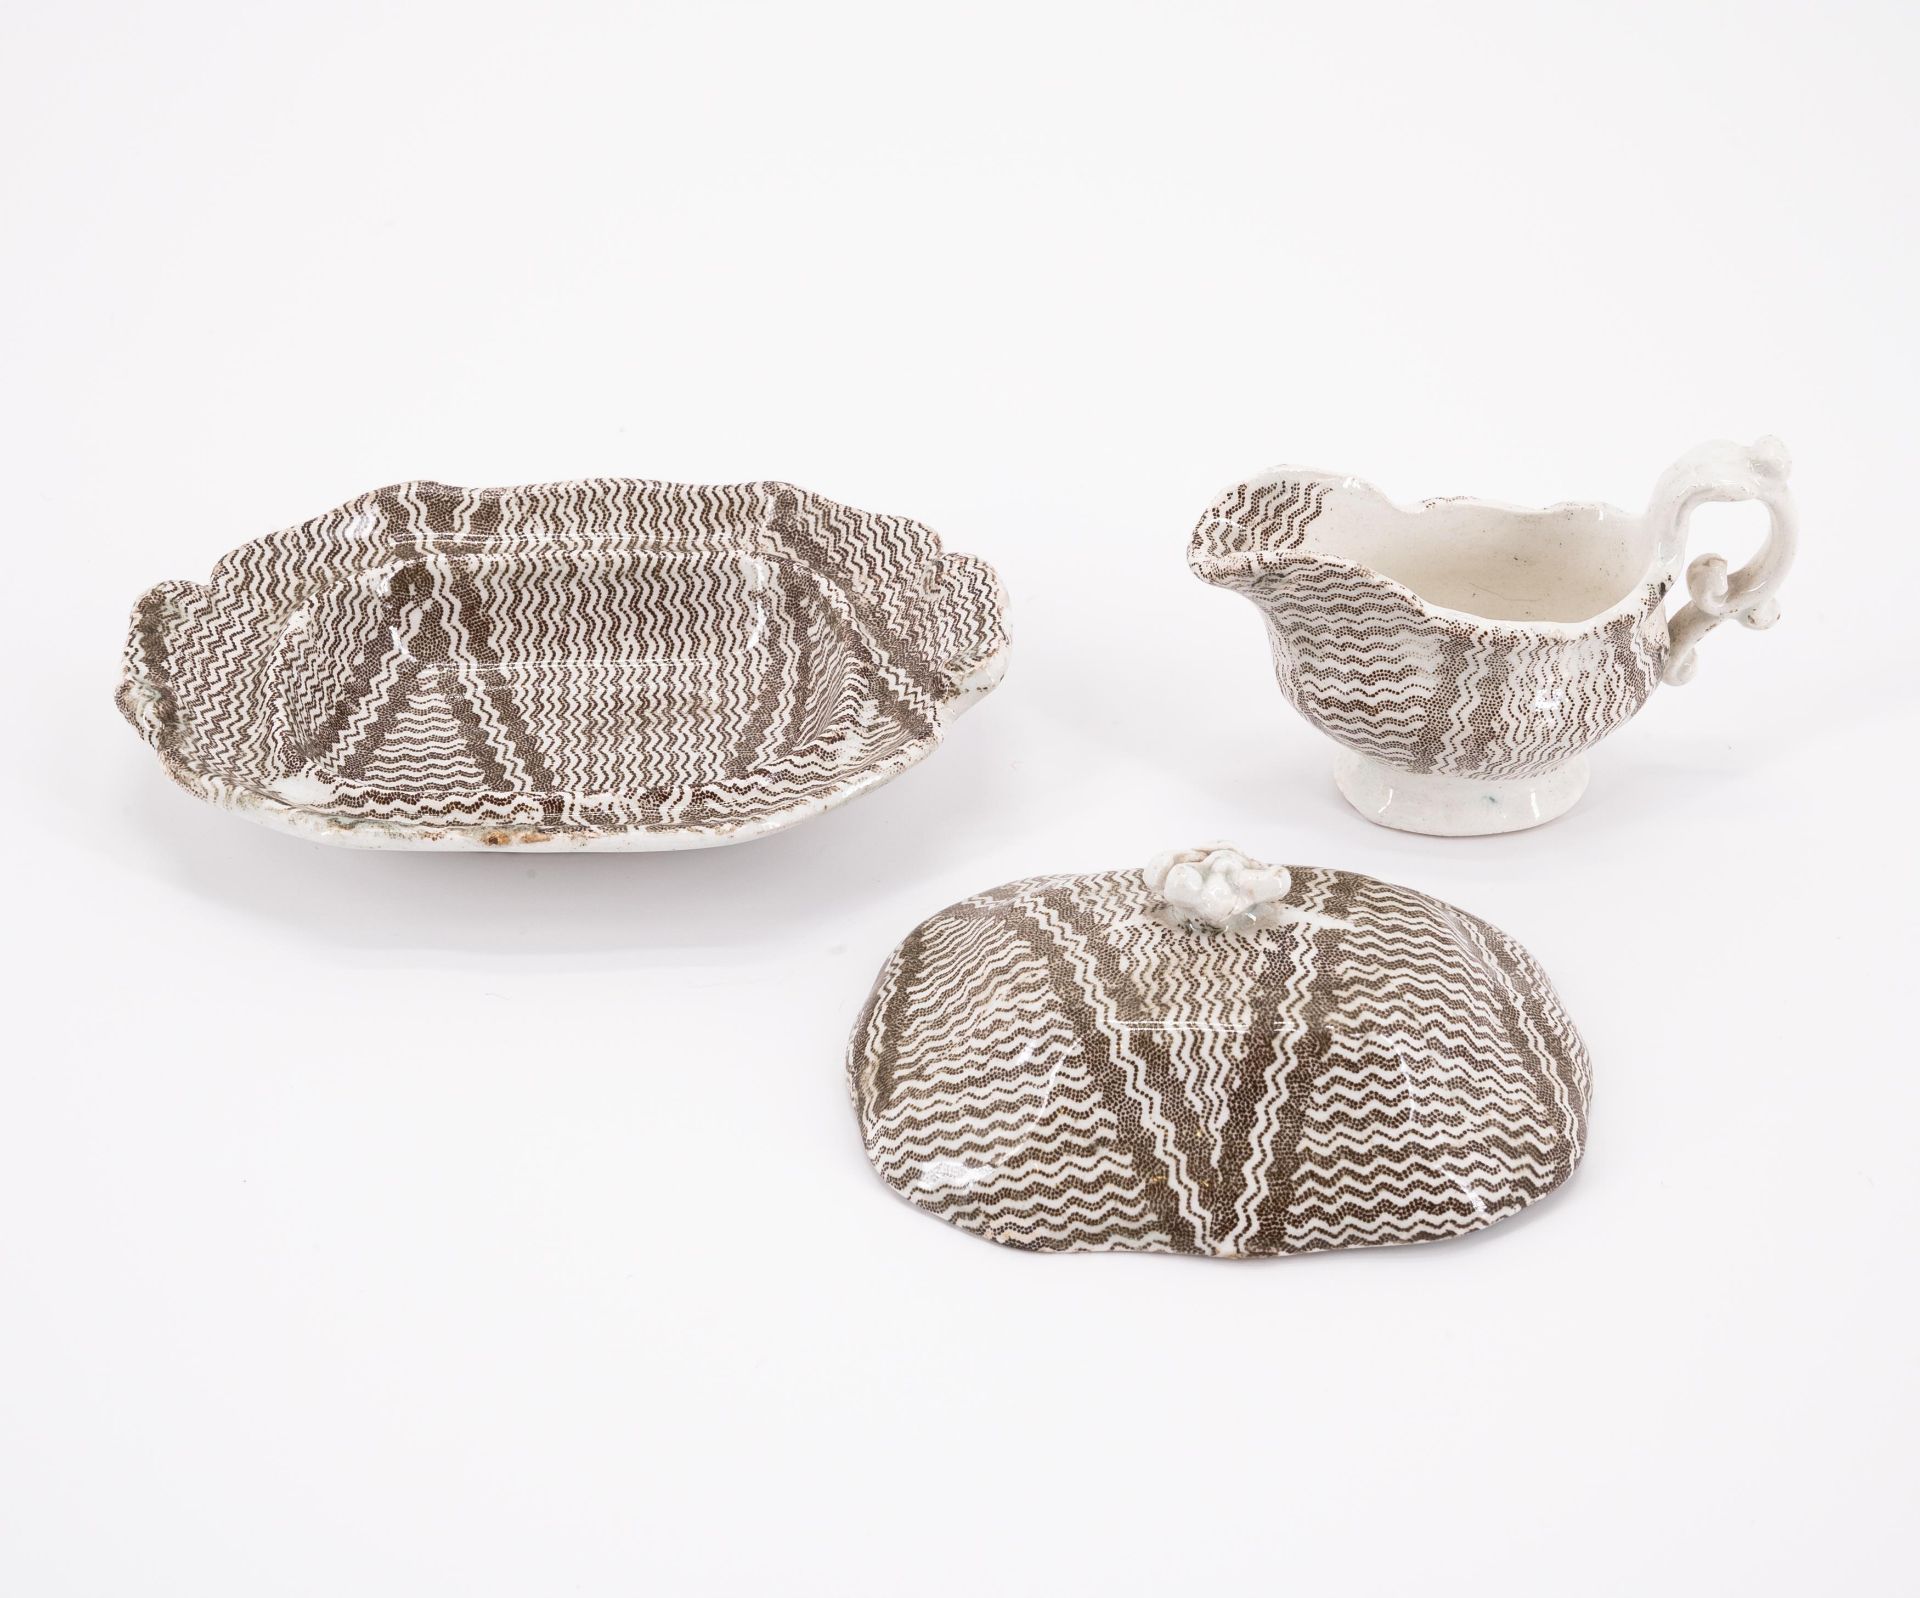 Germany: CERAMIC MINIATURE DINNER SERVICE AND PORCELAIN MINIATURE TEASERVICE - Image 7 of 16